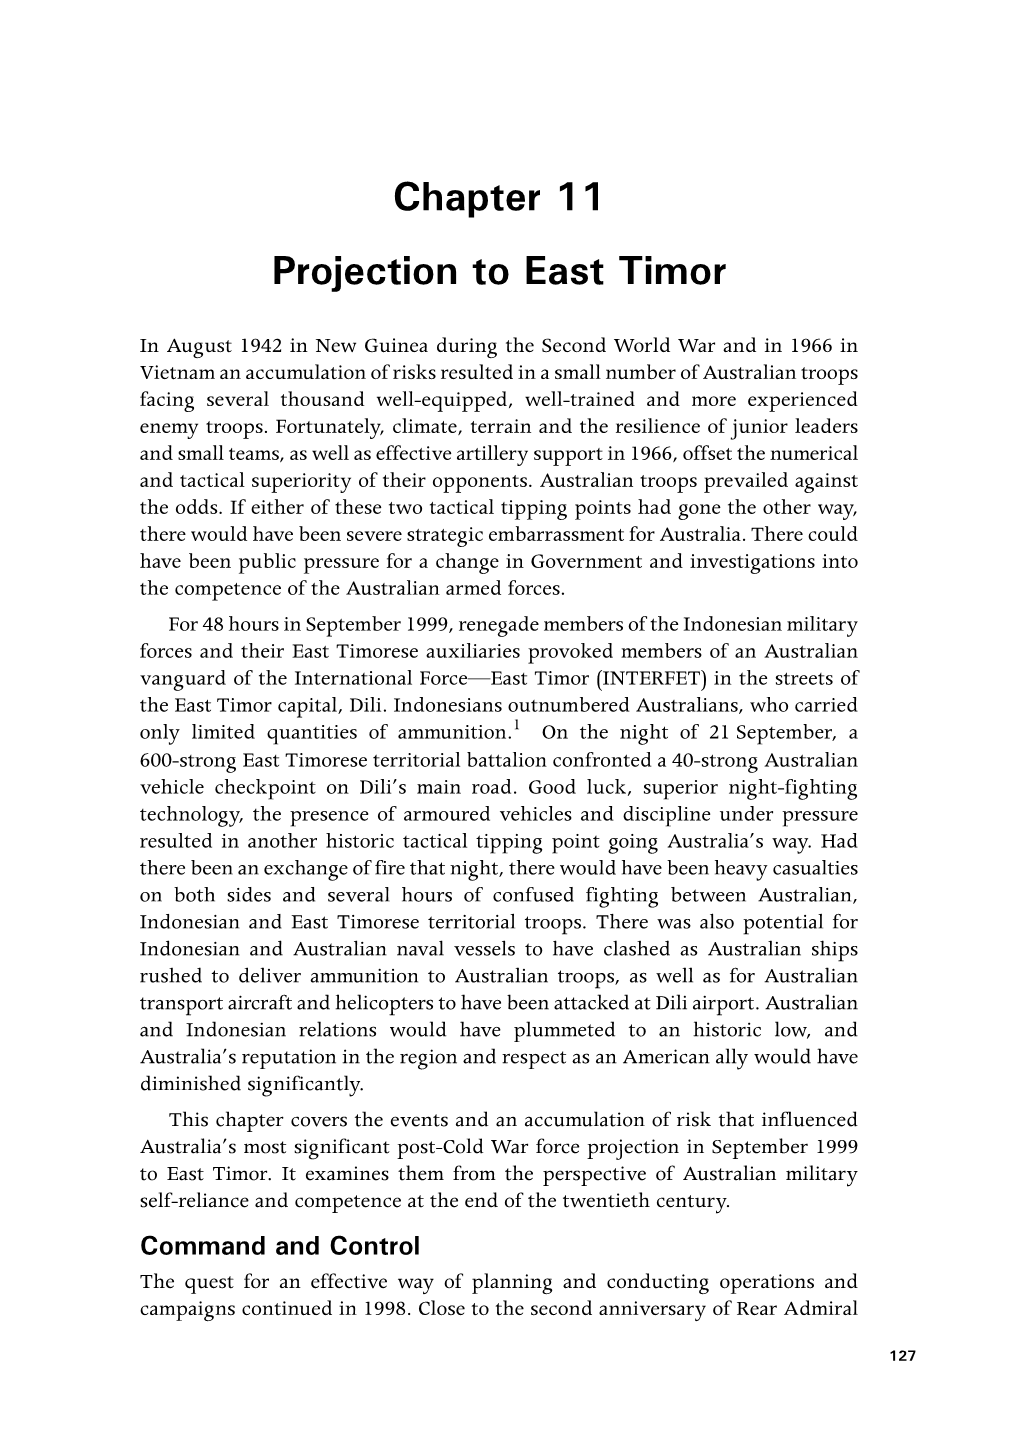 Projection to East Timor